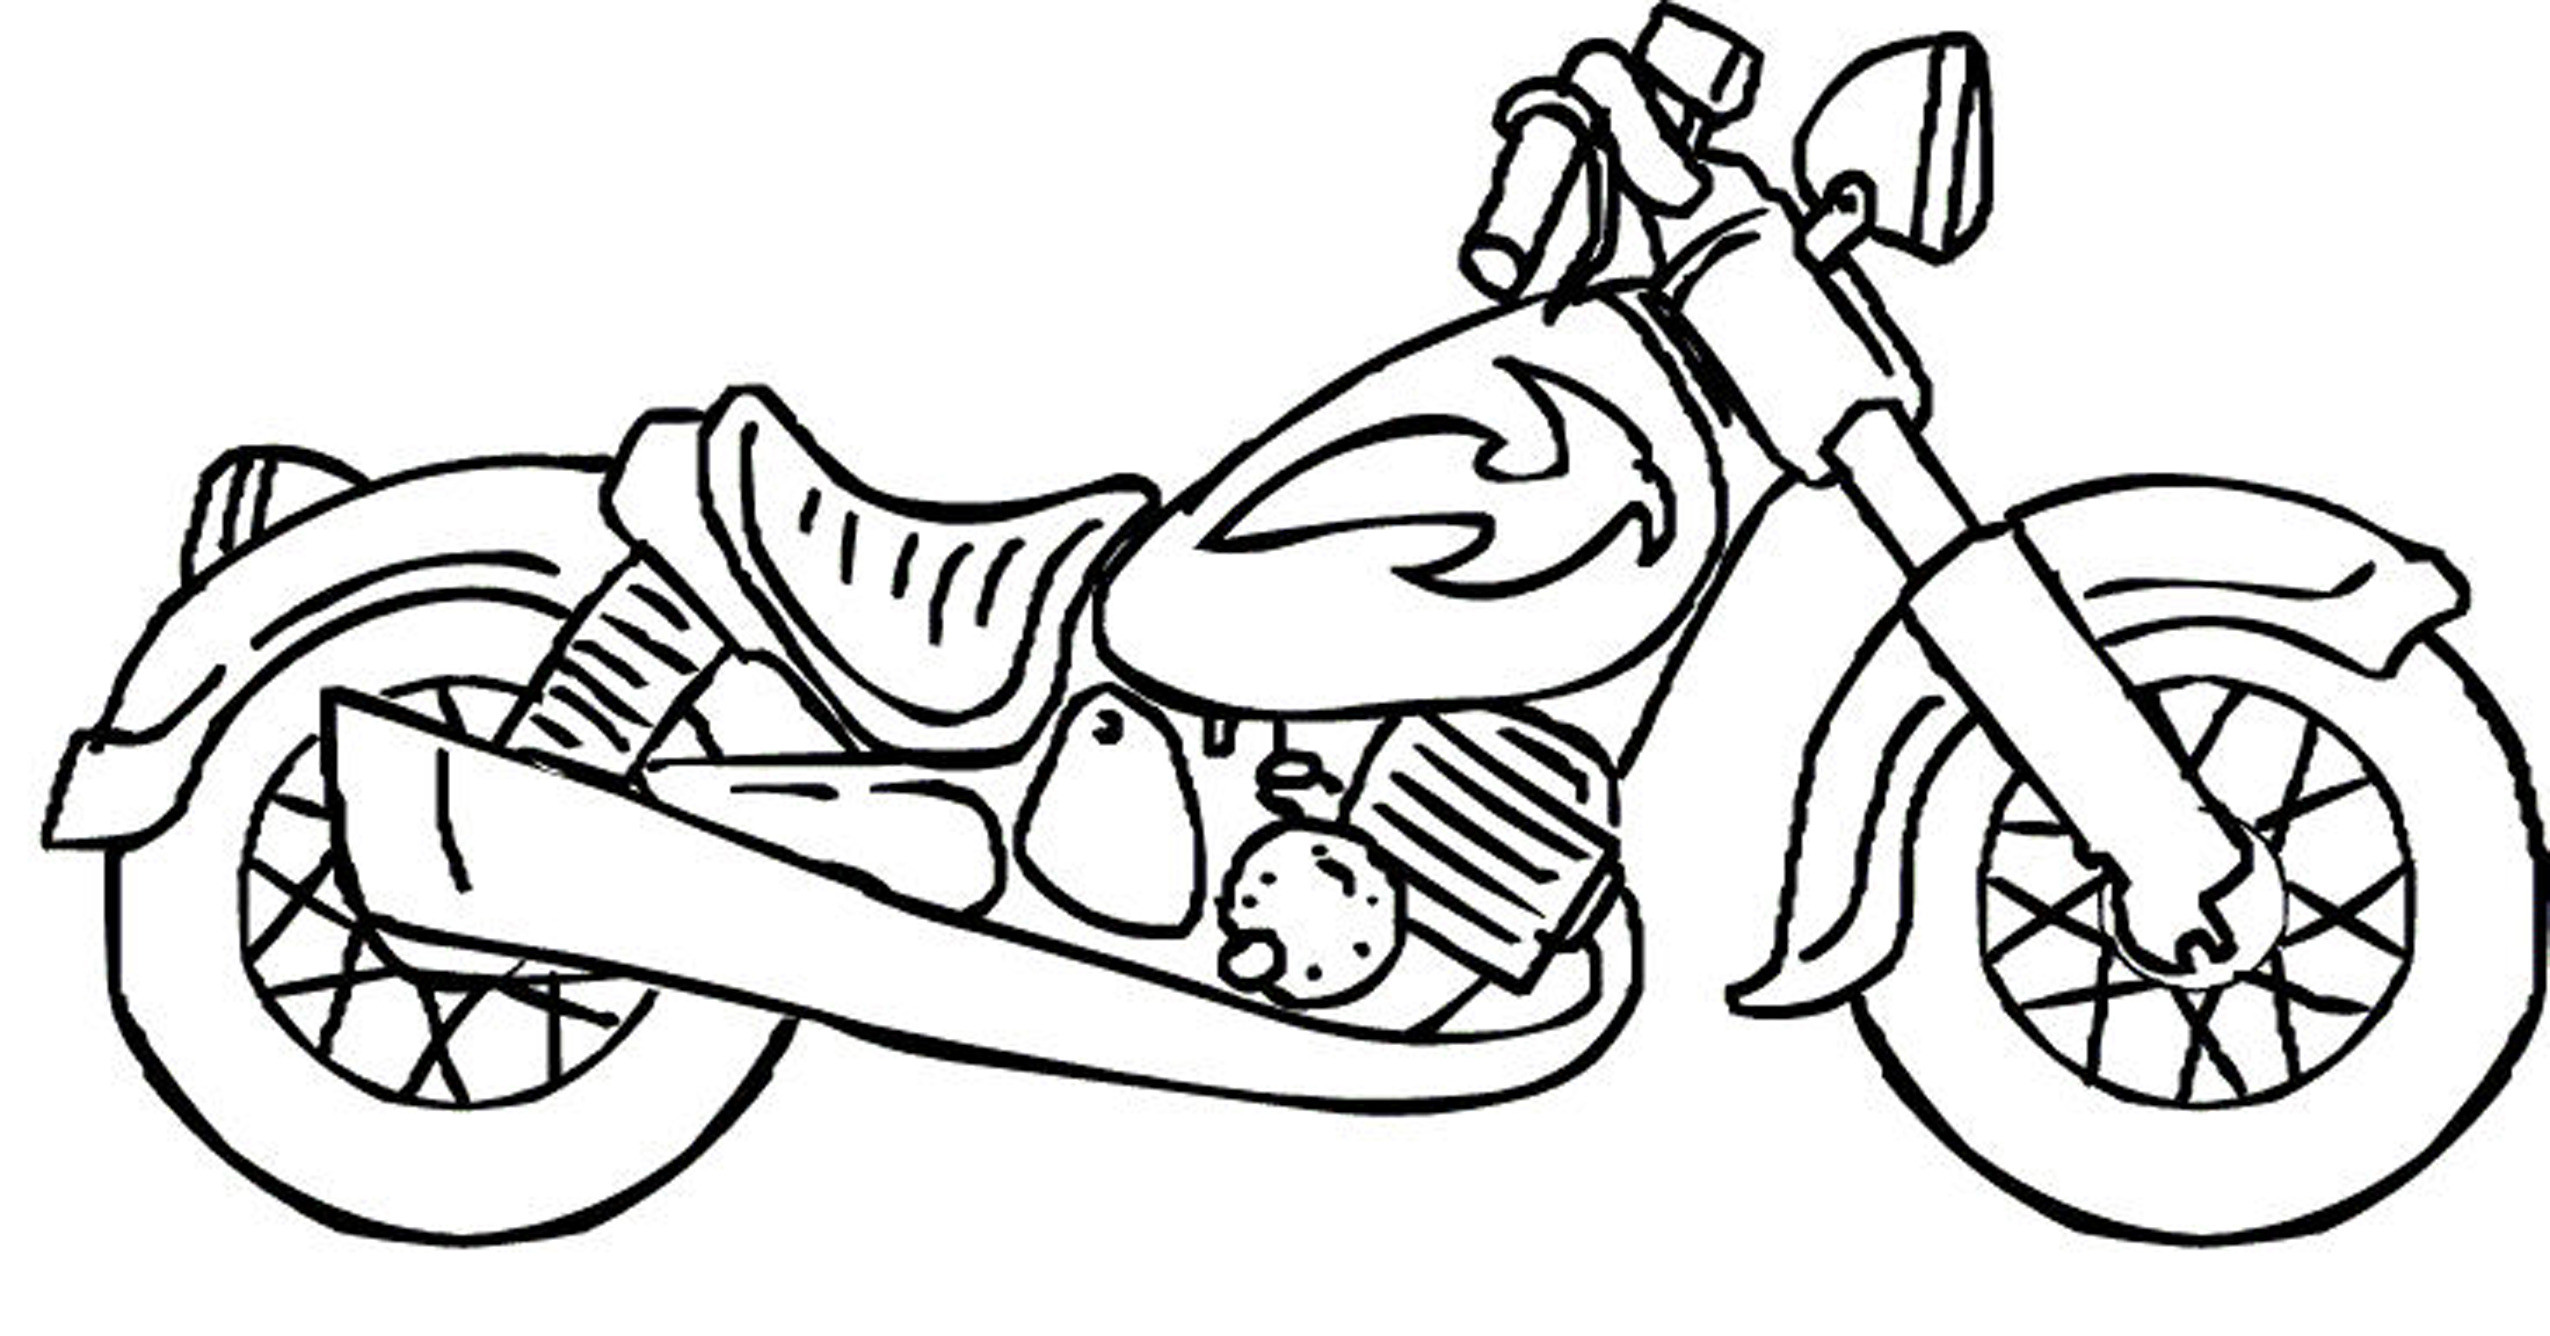 Coloring Pages For Boys Big Boys
 cool coloring pages for boys Gianfreda